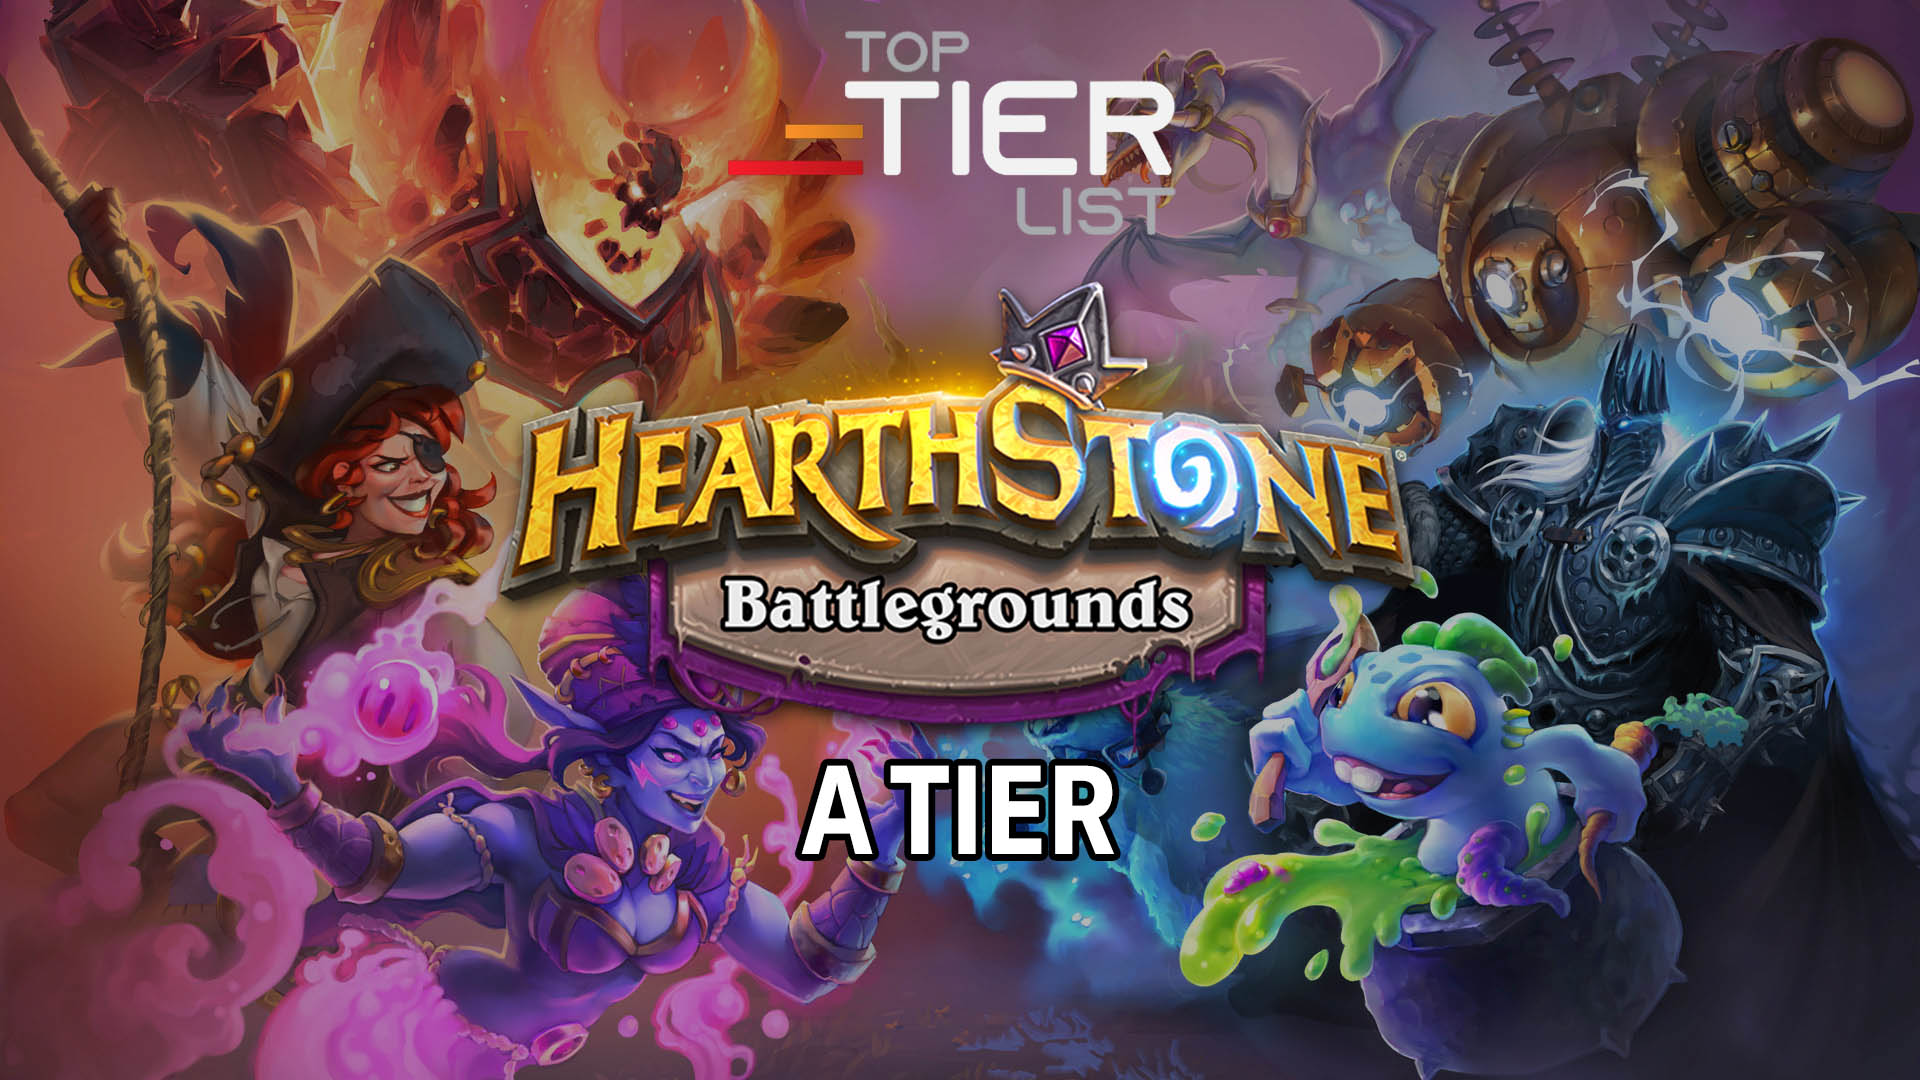 The Prominent Heroes of the Hearthstone Battegrounds Tier List